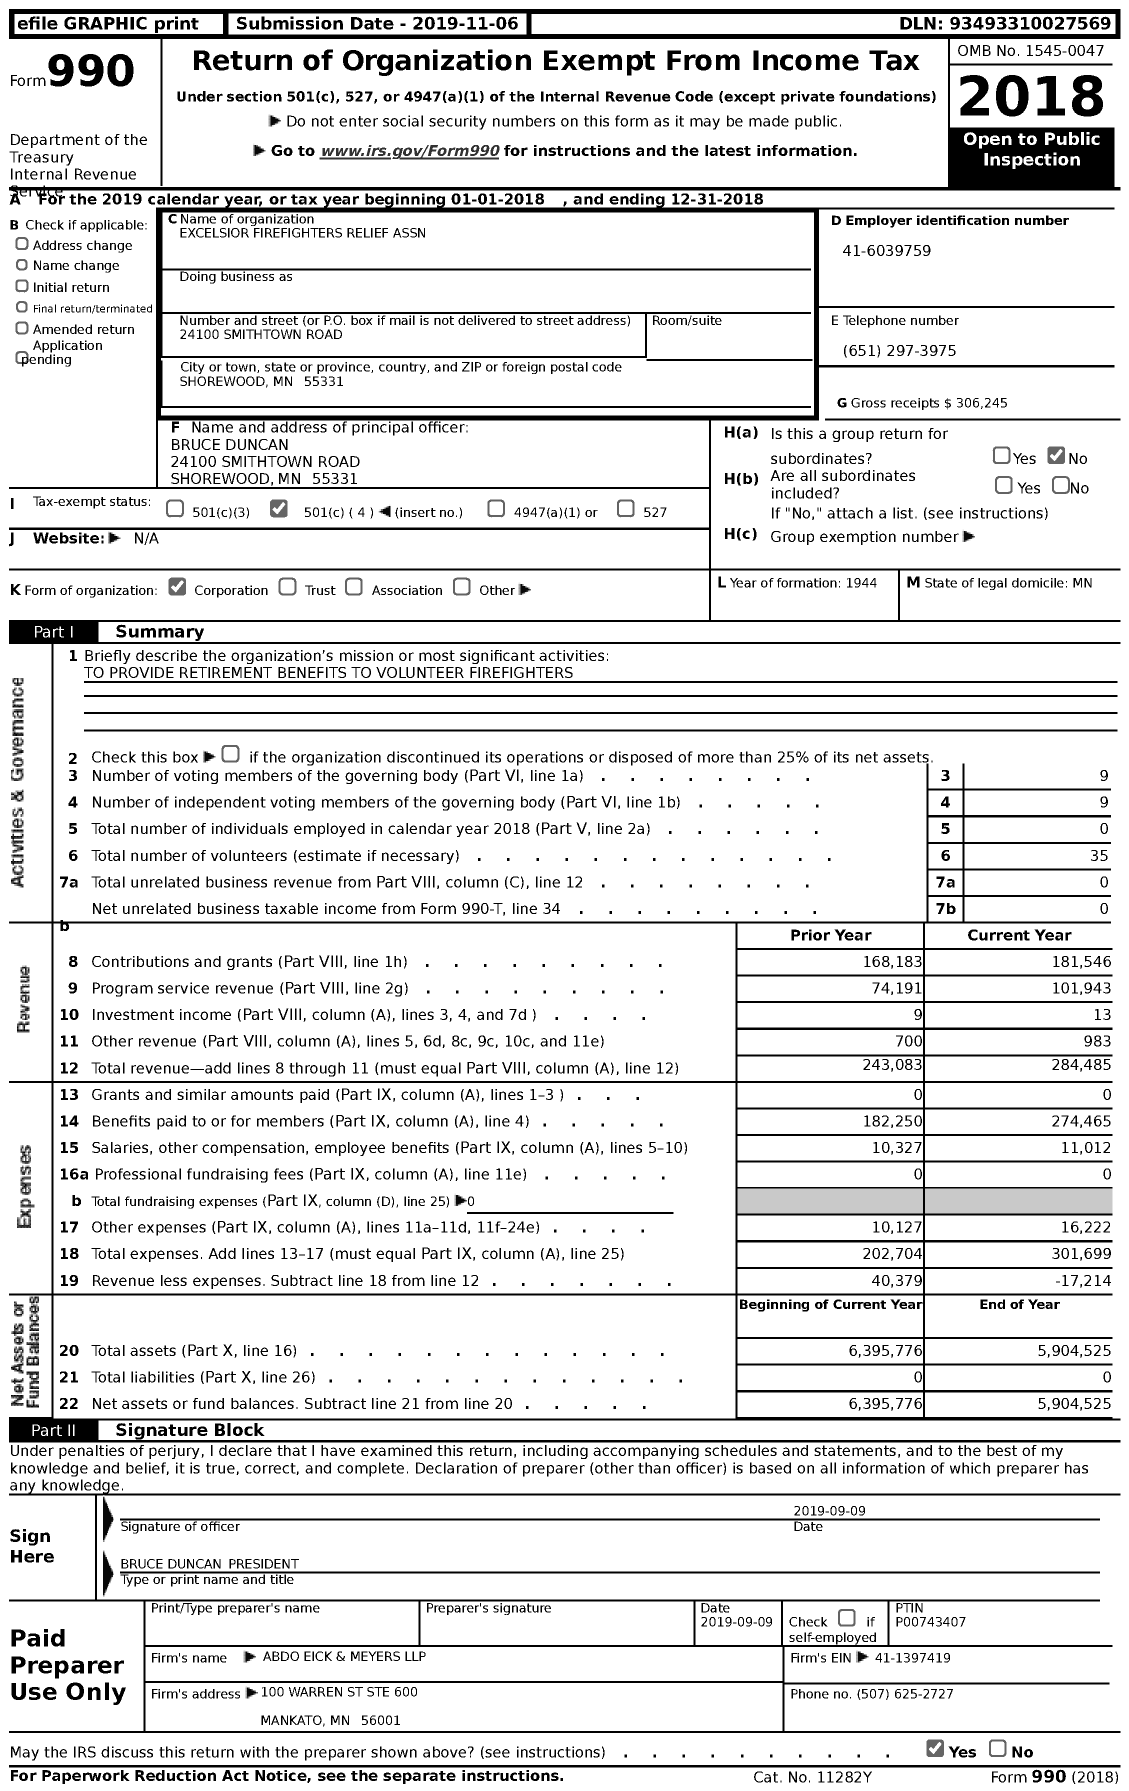 Image of first page of 2018 Form 990 for Excelsior Firefighters Relief Assn